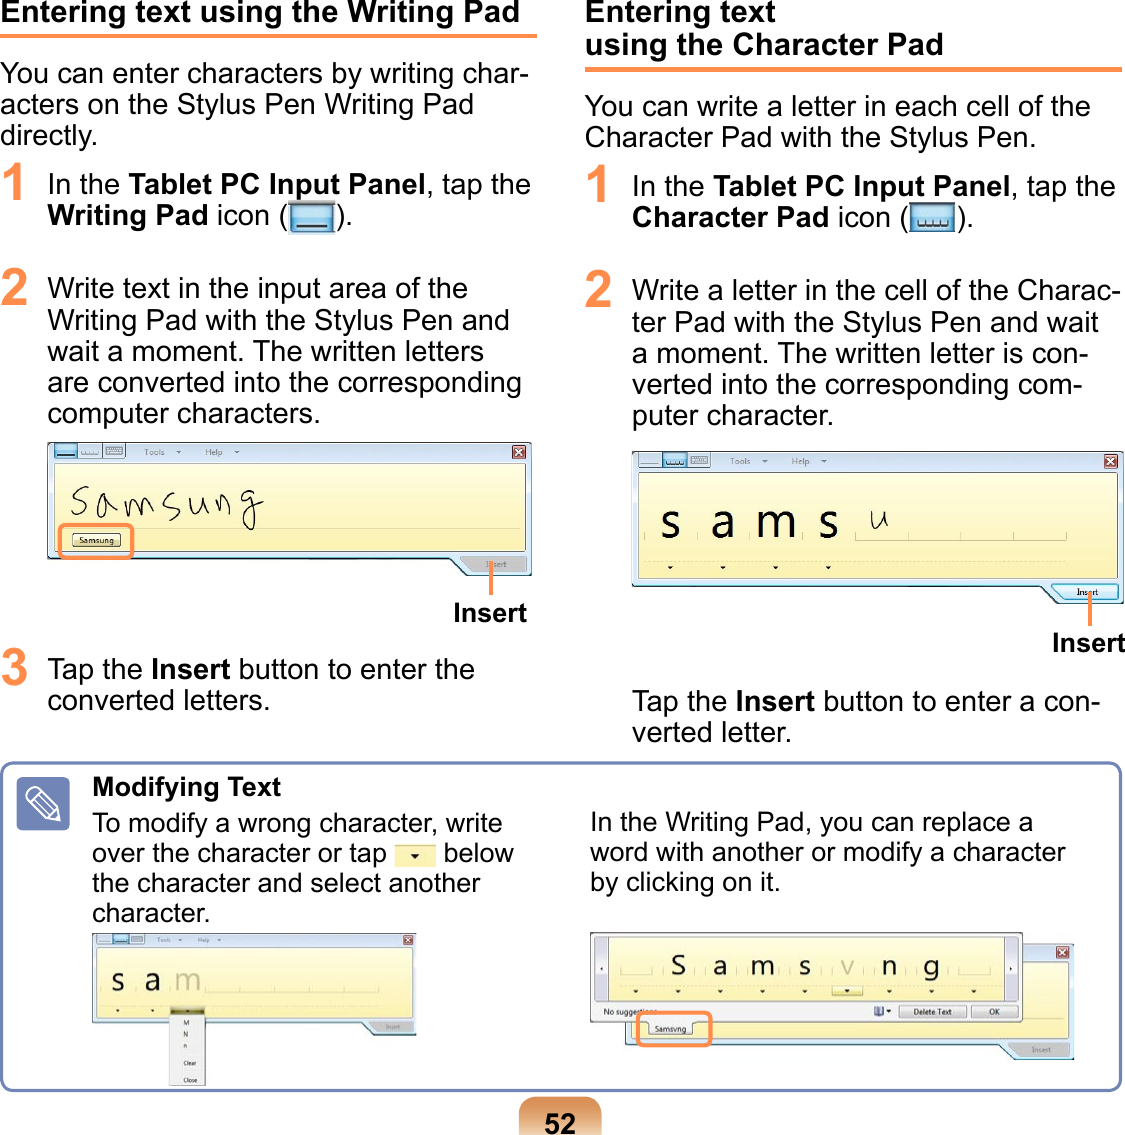 52Entering text using the Writing PadYou can enter characters by writing char-acters on the Stylus Pen Writing Pad directly.1  In the Tablet PC Input Panel, tap the Writing Pad icon ( ).2  Write text in the input area of the Writing Pad with the Stylus Pen and wait a moment. The written letters are converted into the corresponding computer characters. Insert3  Tap the Insert button to enter the converted letters.Entering text  using the Character PadYou can write a letter in each cell of the Character Pad with the Stylus Pen.1  In the Tablet PC Input Panel, tap the Character Pad icon ( ).2  Write a letter in the cell of the Charac-ter Pad with the Stylus Pen and wait a moment. The written letter is con-verted into the corresponding com-puter character. InsertTap the Insert button to enter a con-verted letter.Modifying TextTo modify a wrong character, write over the character or tap   below the character and select another character.In the Writing Pad, you can replace a word with another or modify a character by clicking on it.